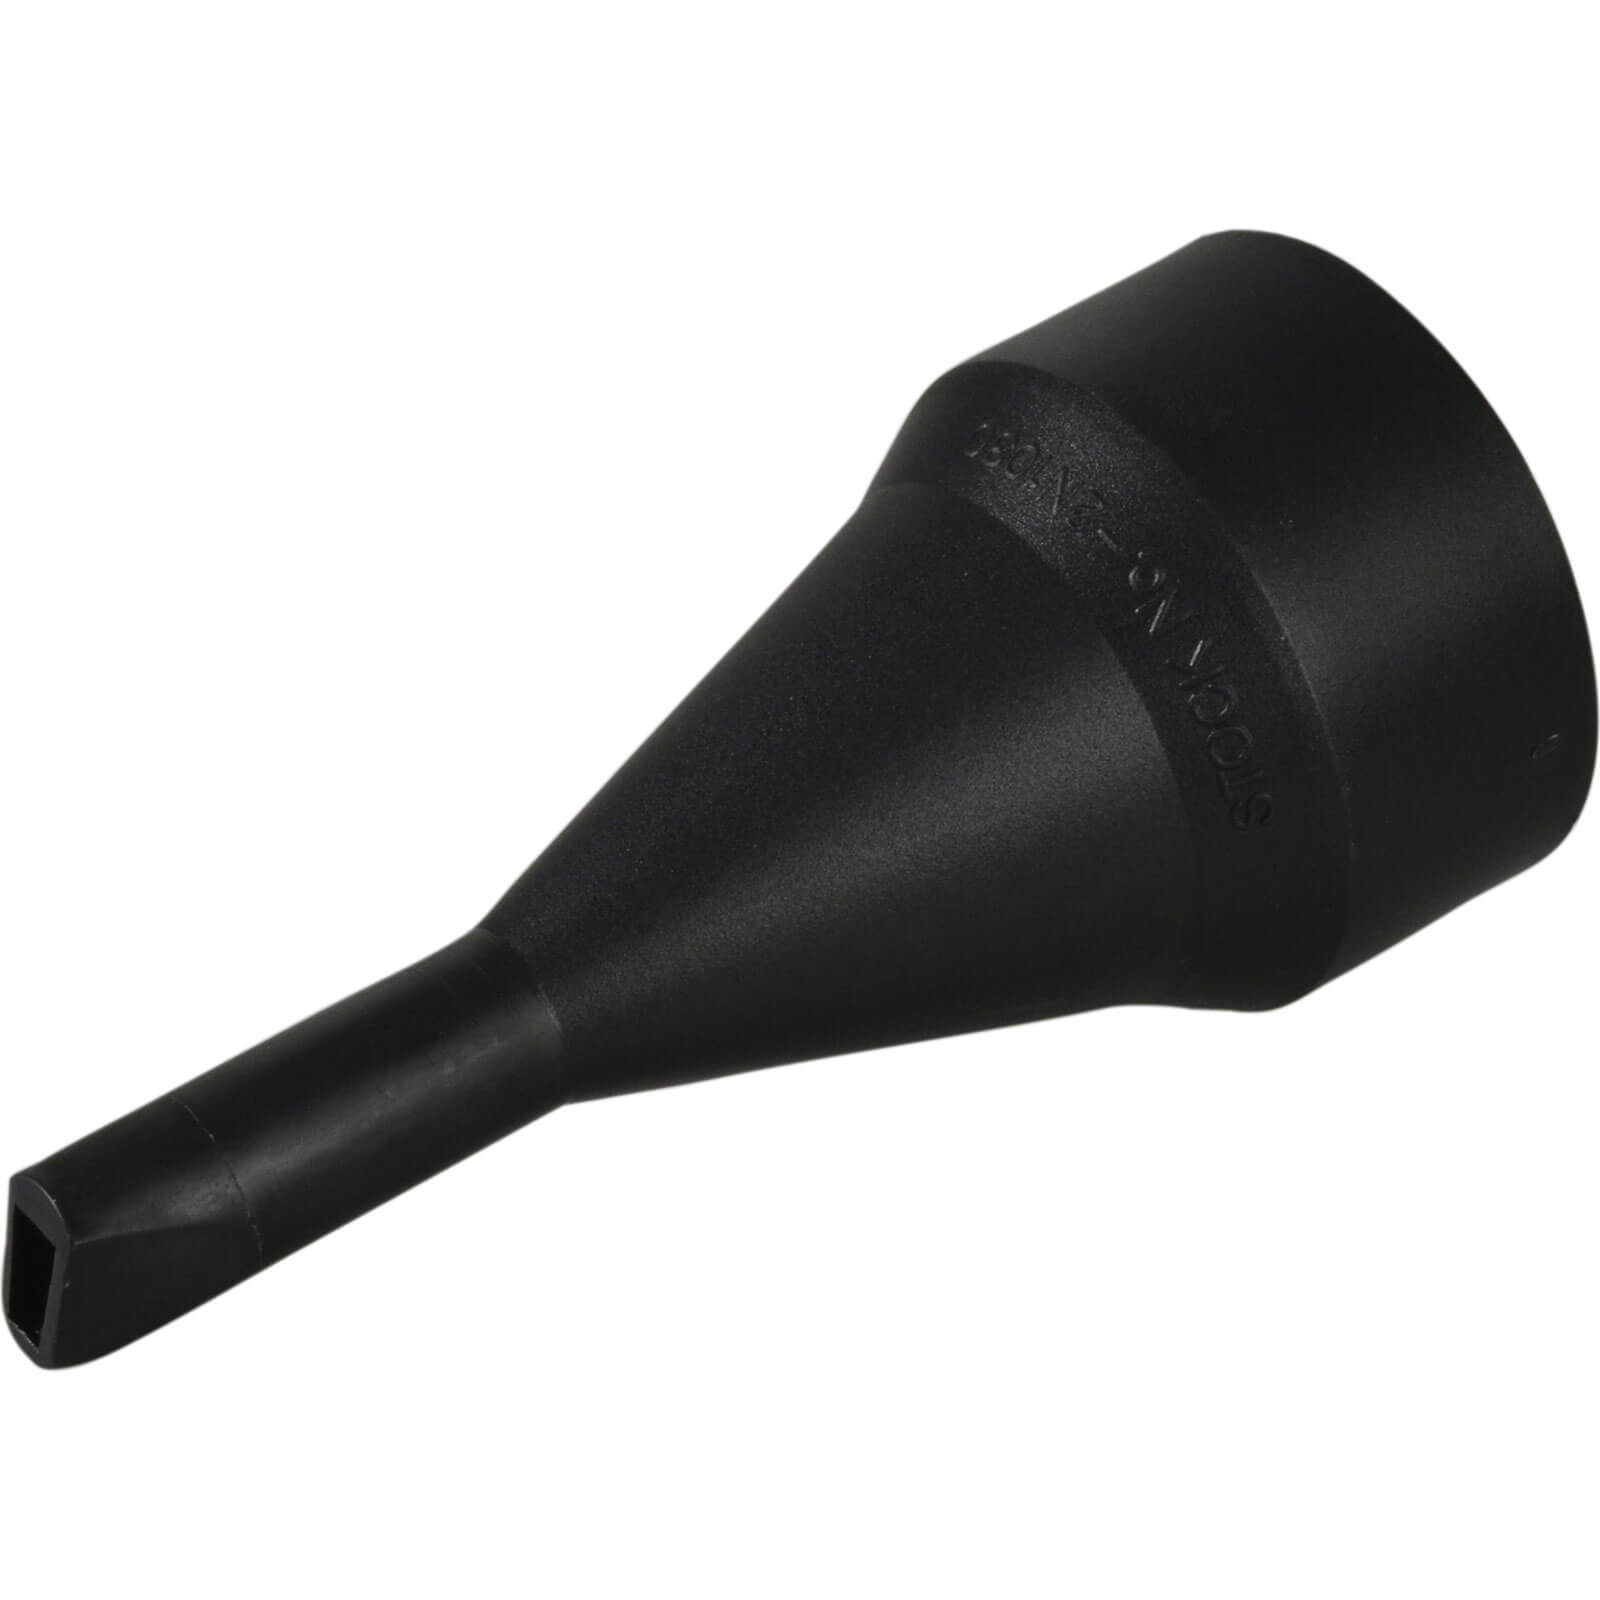 Image of Cox 2N1030 Black Nozzle for Pointing